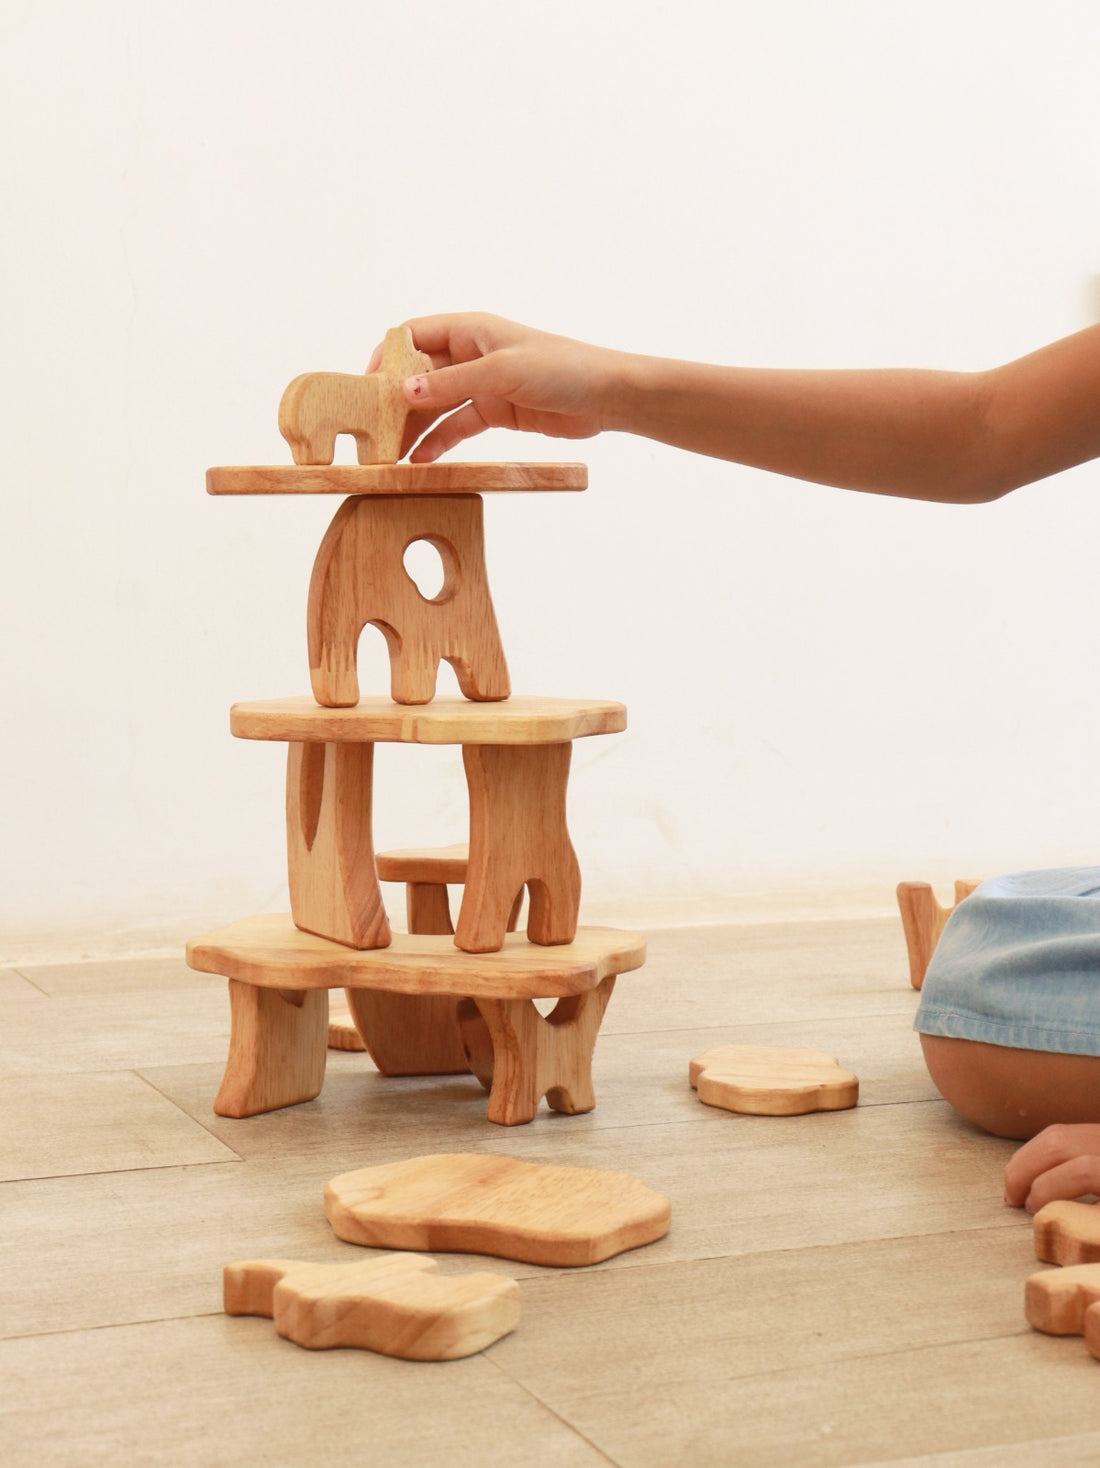 Think Outside the Blocks: Enhancing Creative Thinking with Wooden Construction Sets